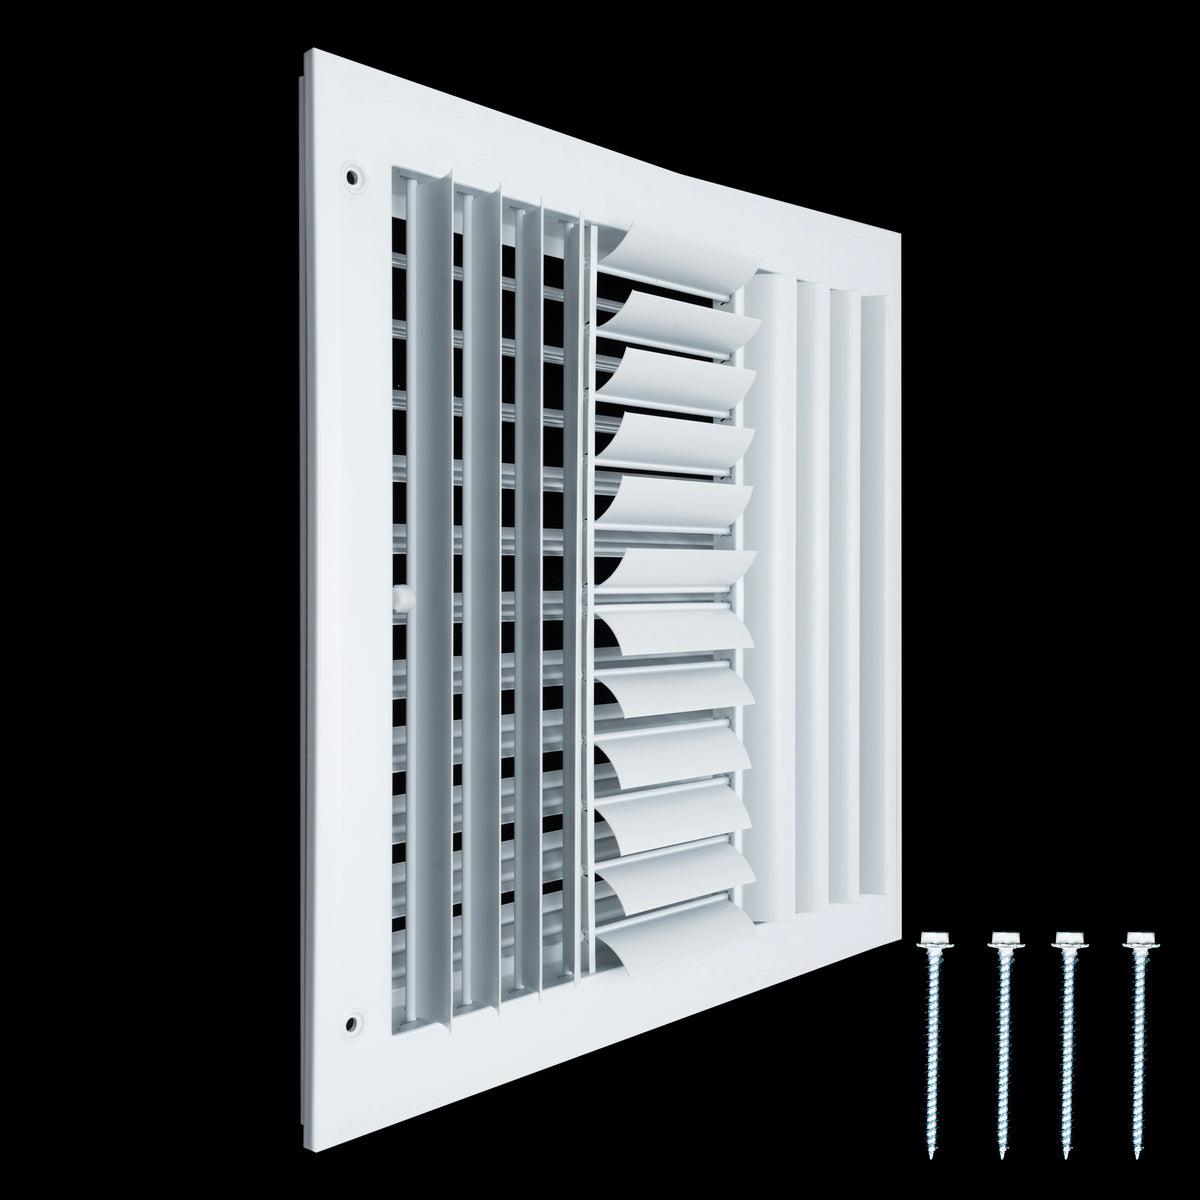 12"W x 12"H [Duct Opening] Aluminum 4-WAY Adjustable Air Supply Grille | Register Vent Cover Grill for Sidewall and Ceiling | White | Outer Dimensions: 13.75"W x 13.75"